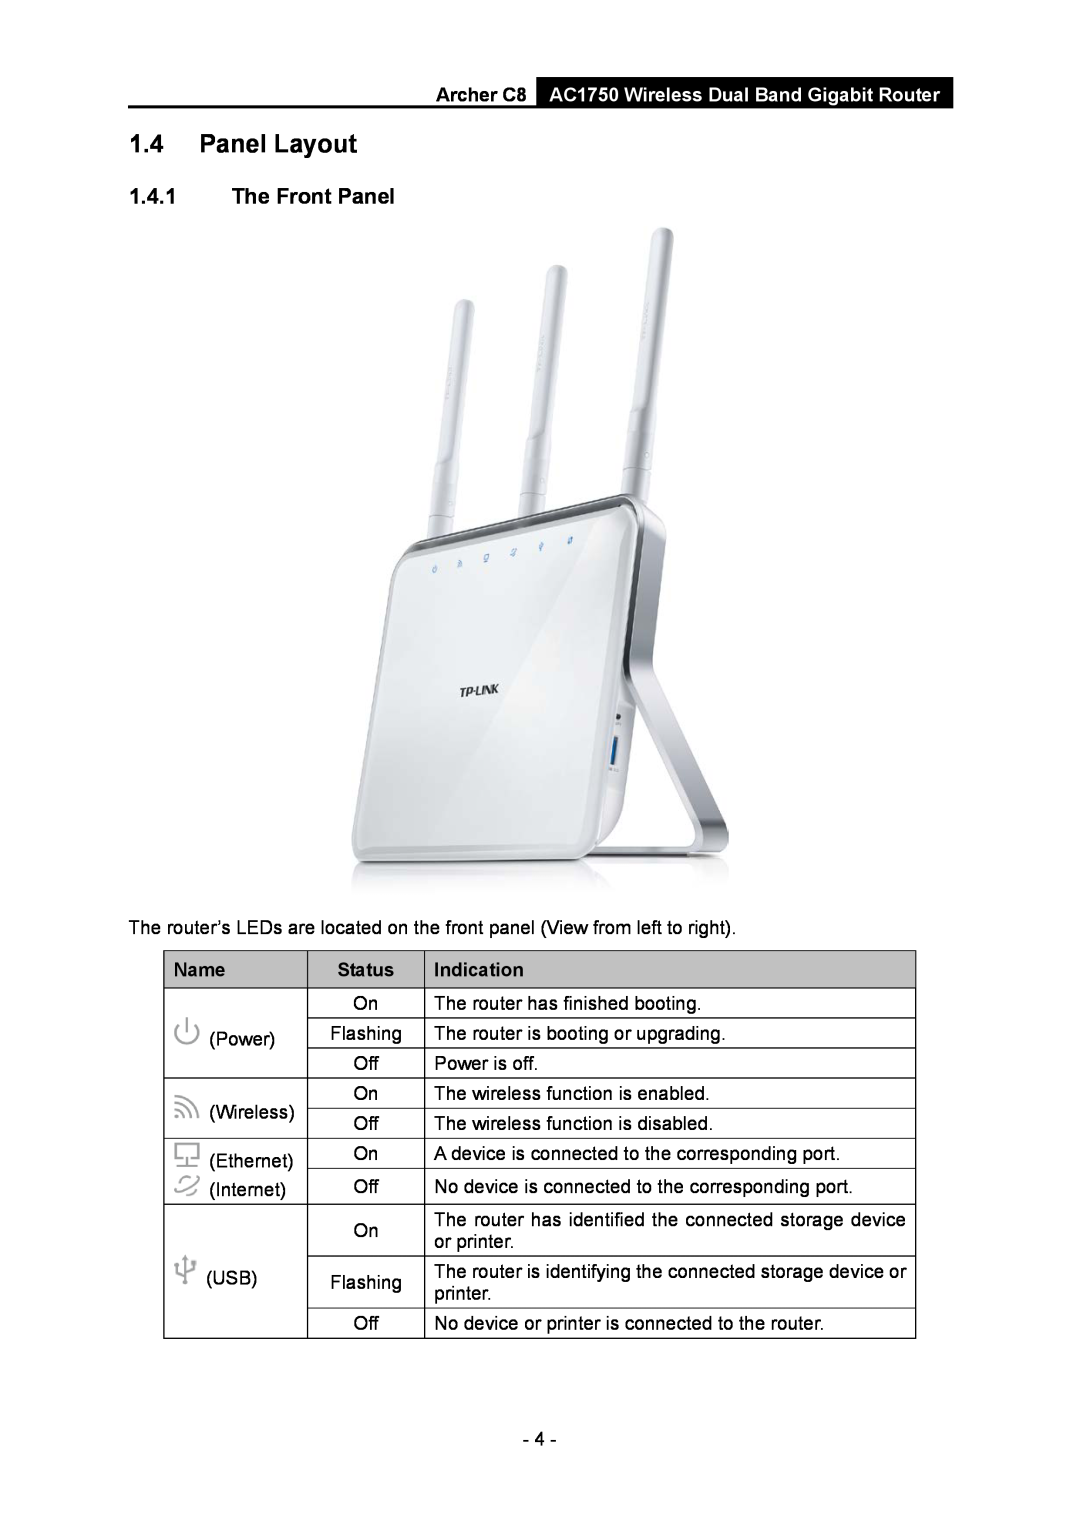 TP-Link manual Panel Layout, Archer C8 AC1750 Wireless Dual Band Gigabit Router, Name, Status, Indication 